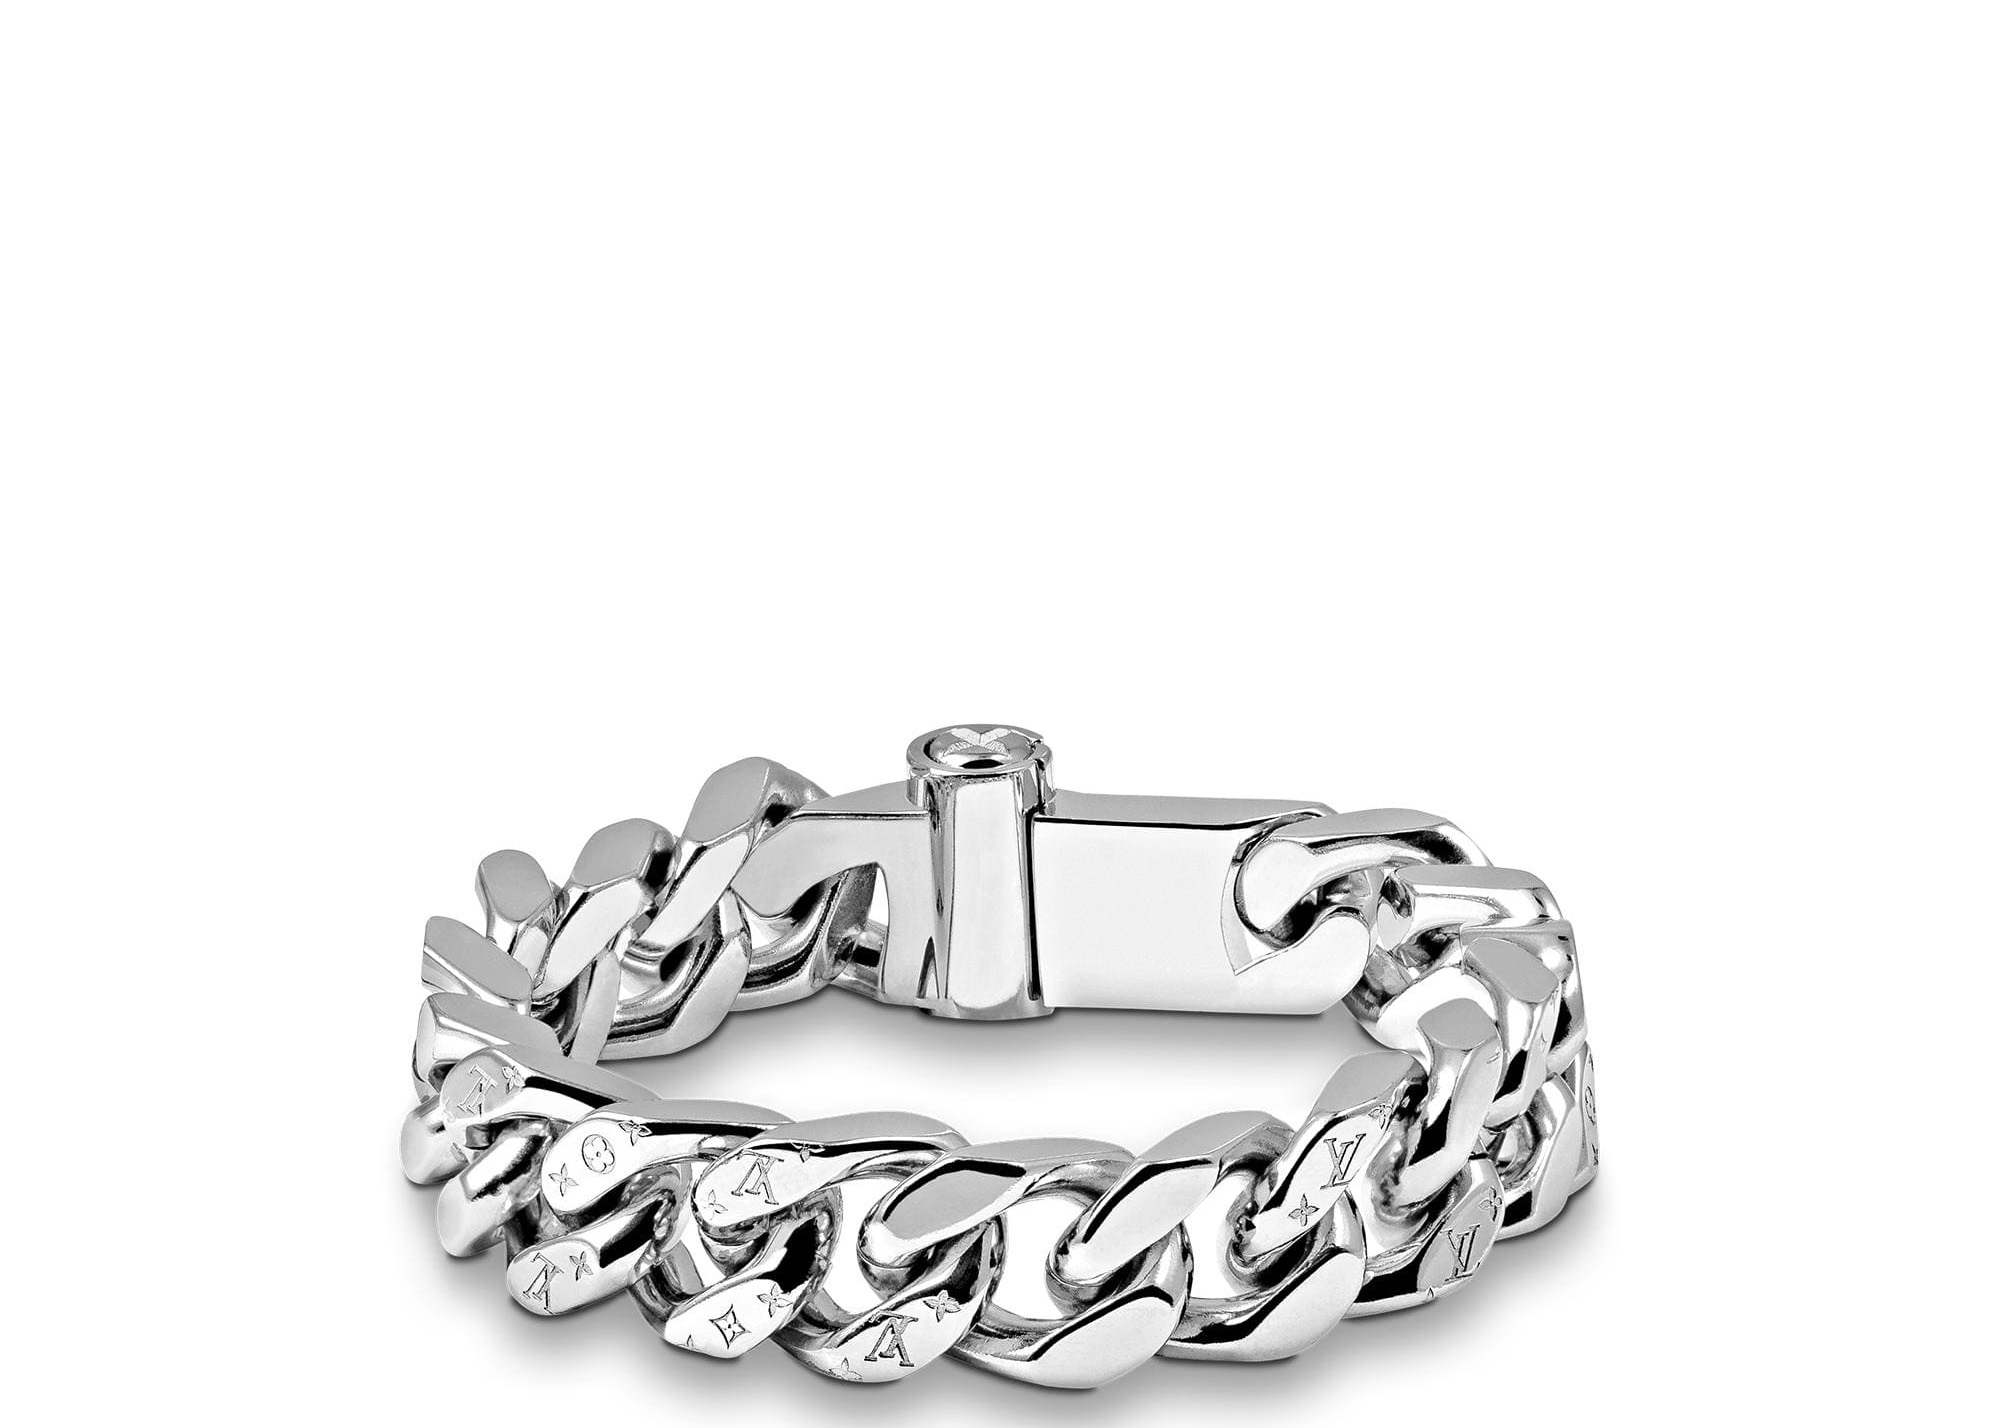 Buy Watch Chain Bracelet Online In India  Etsy India